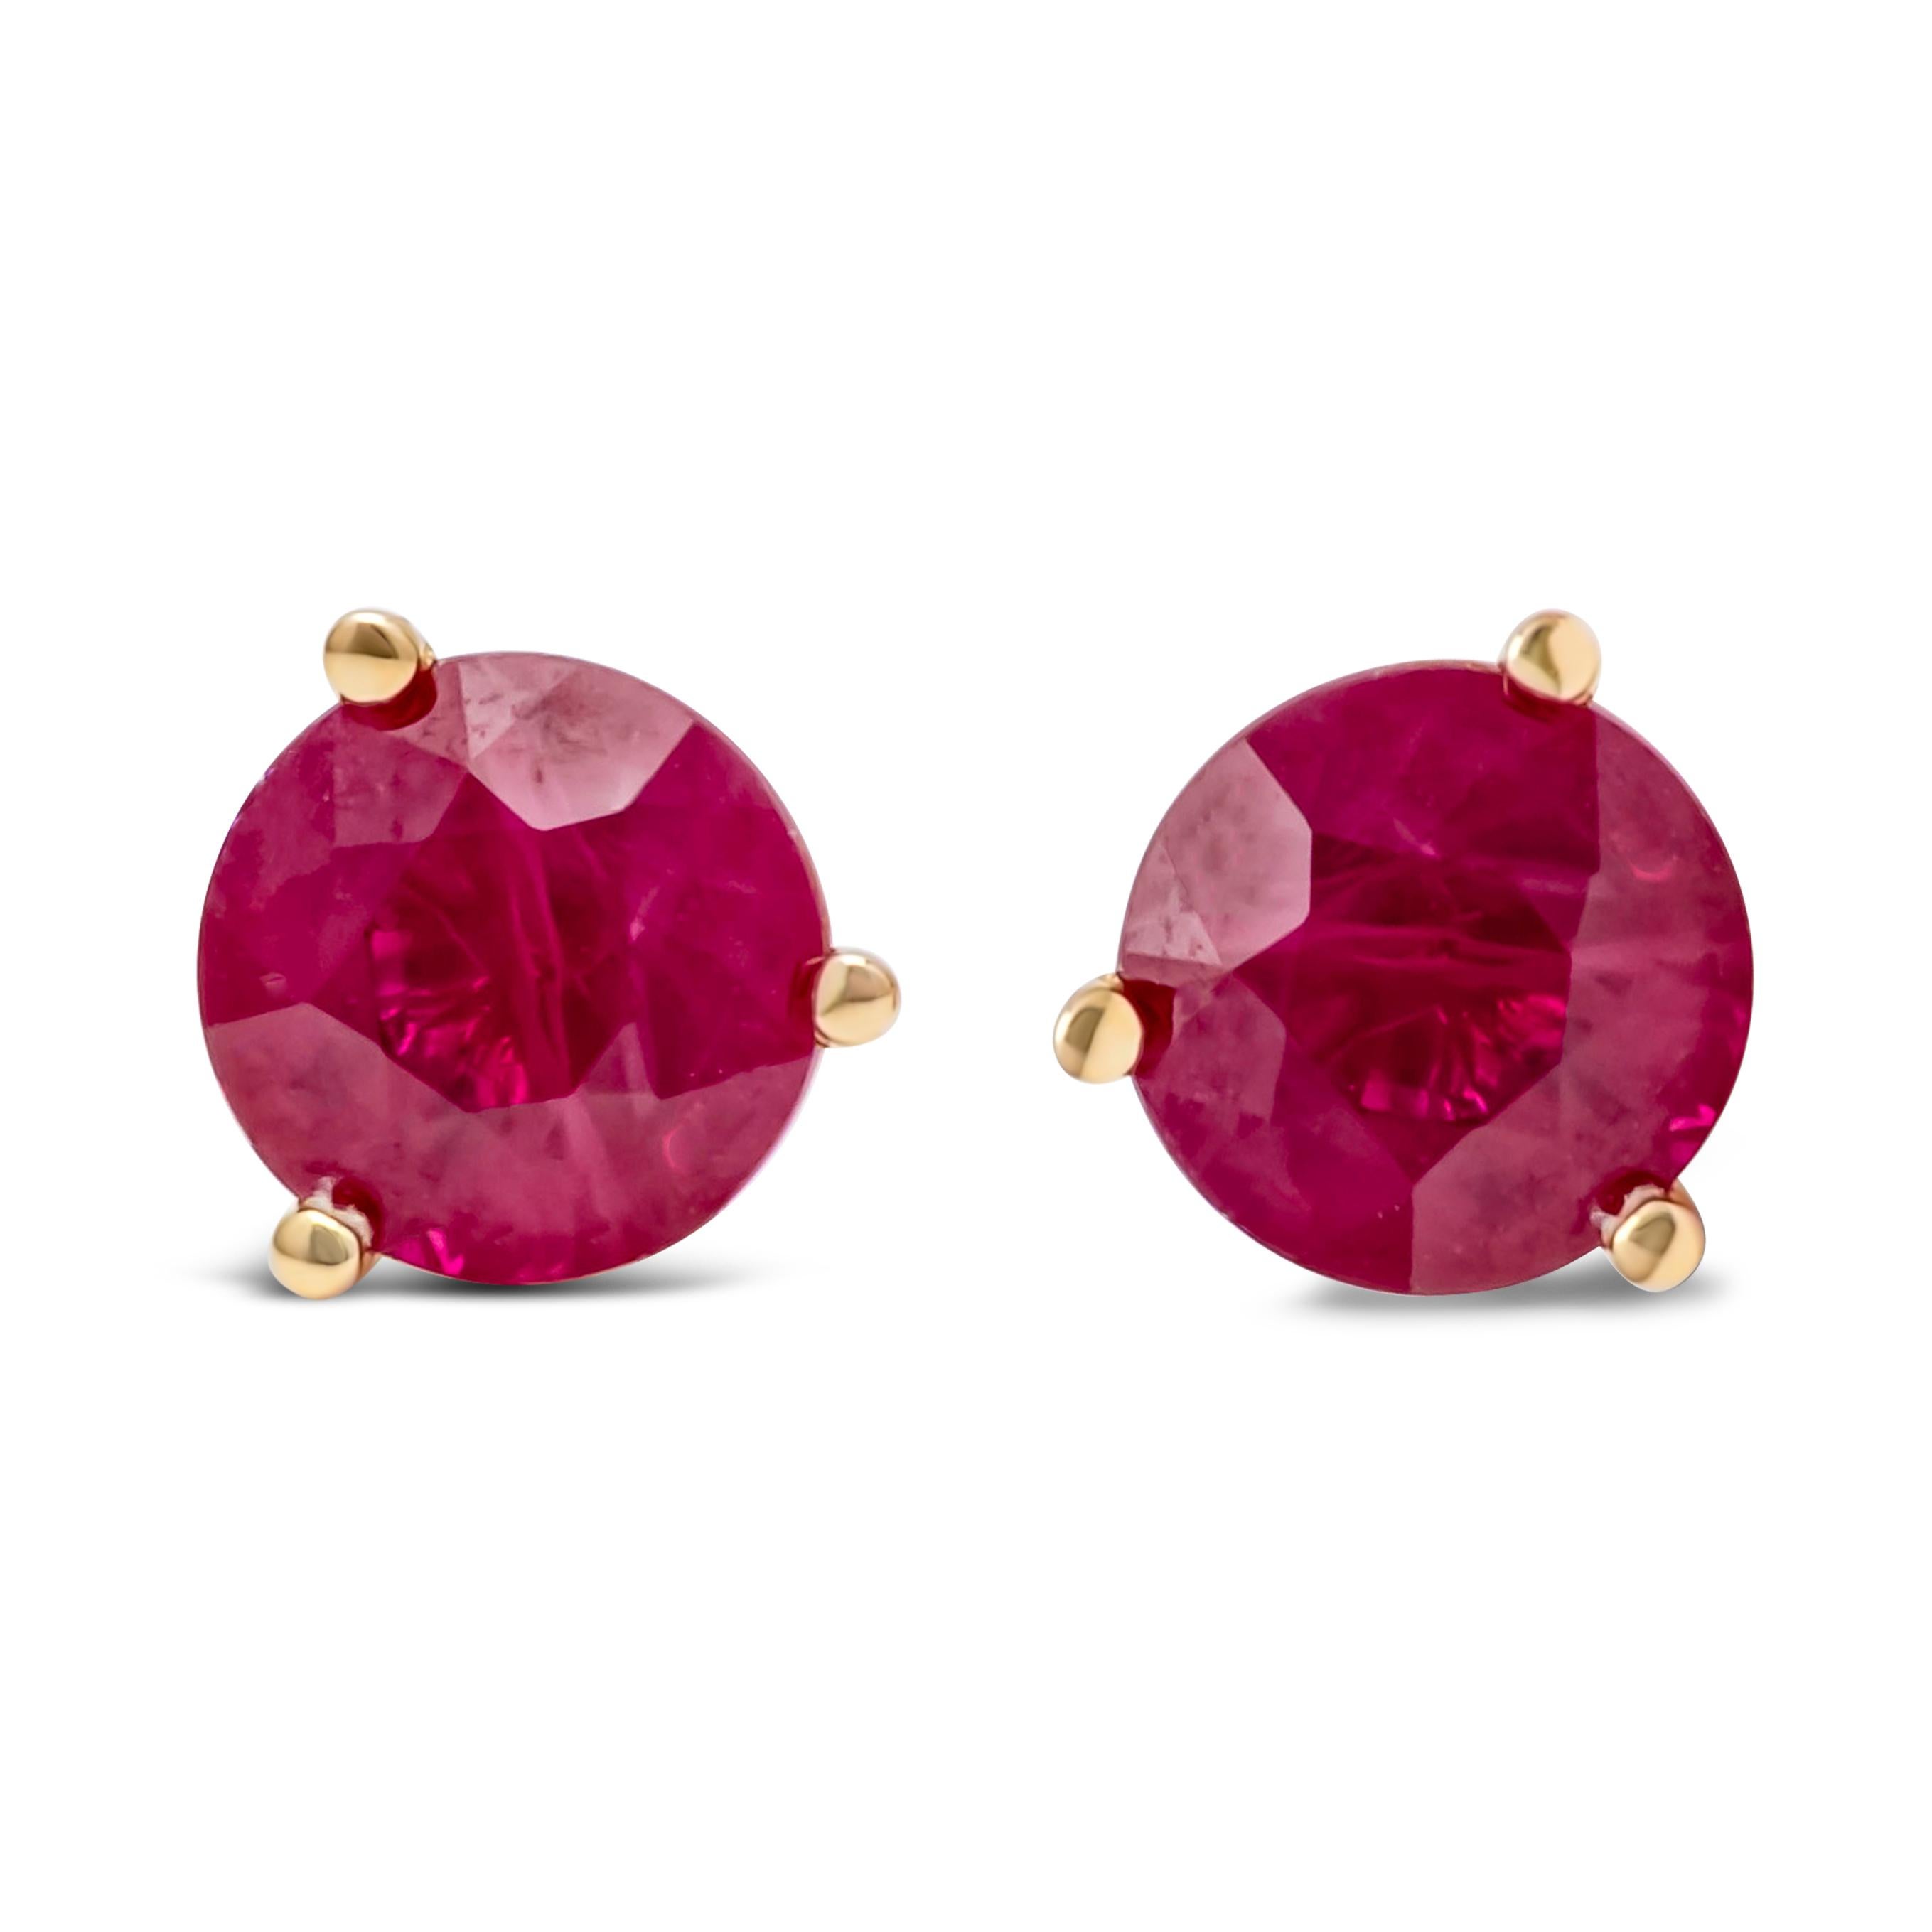 A classic pair of stud earrings showcasing a vibrant red round cut  Burmese rubies weighing 2.10 carats total. Set in a timeless three prong push back setting and Finely made in 18k yellow gold.

Roman Malakov is a custom house, specializing in